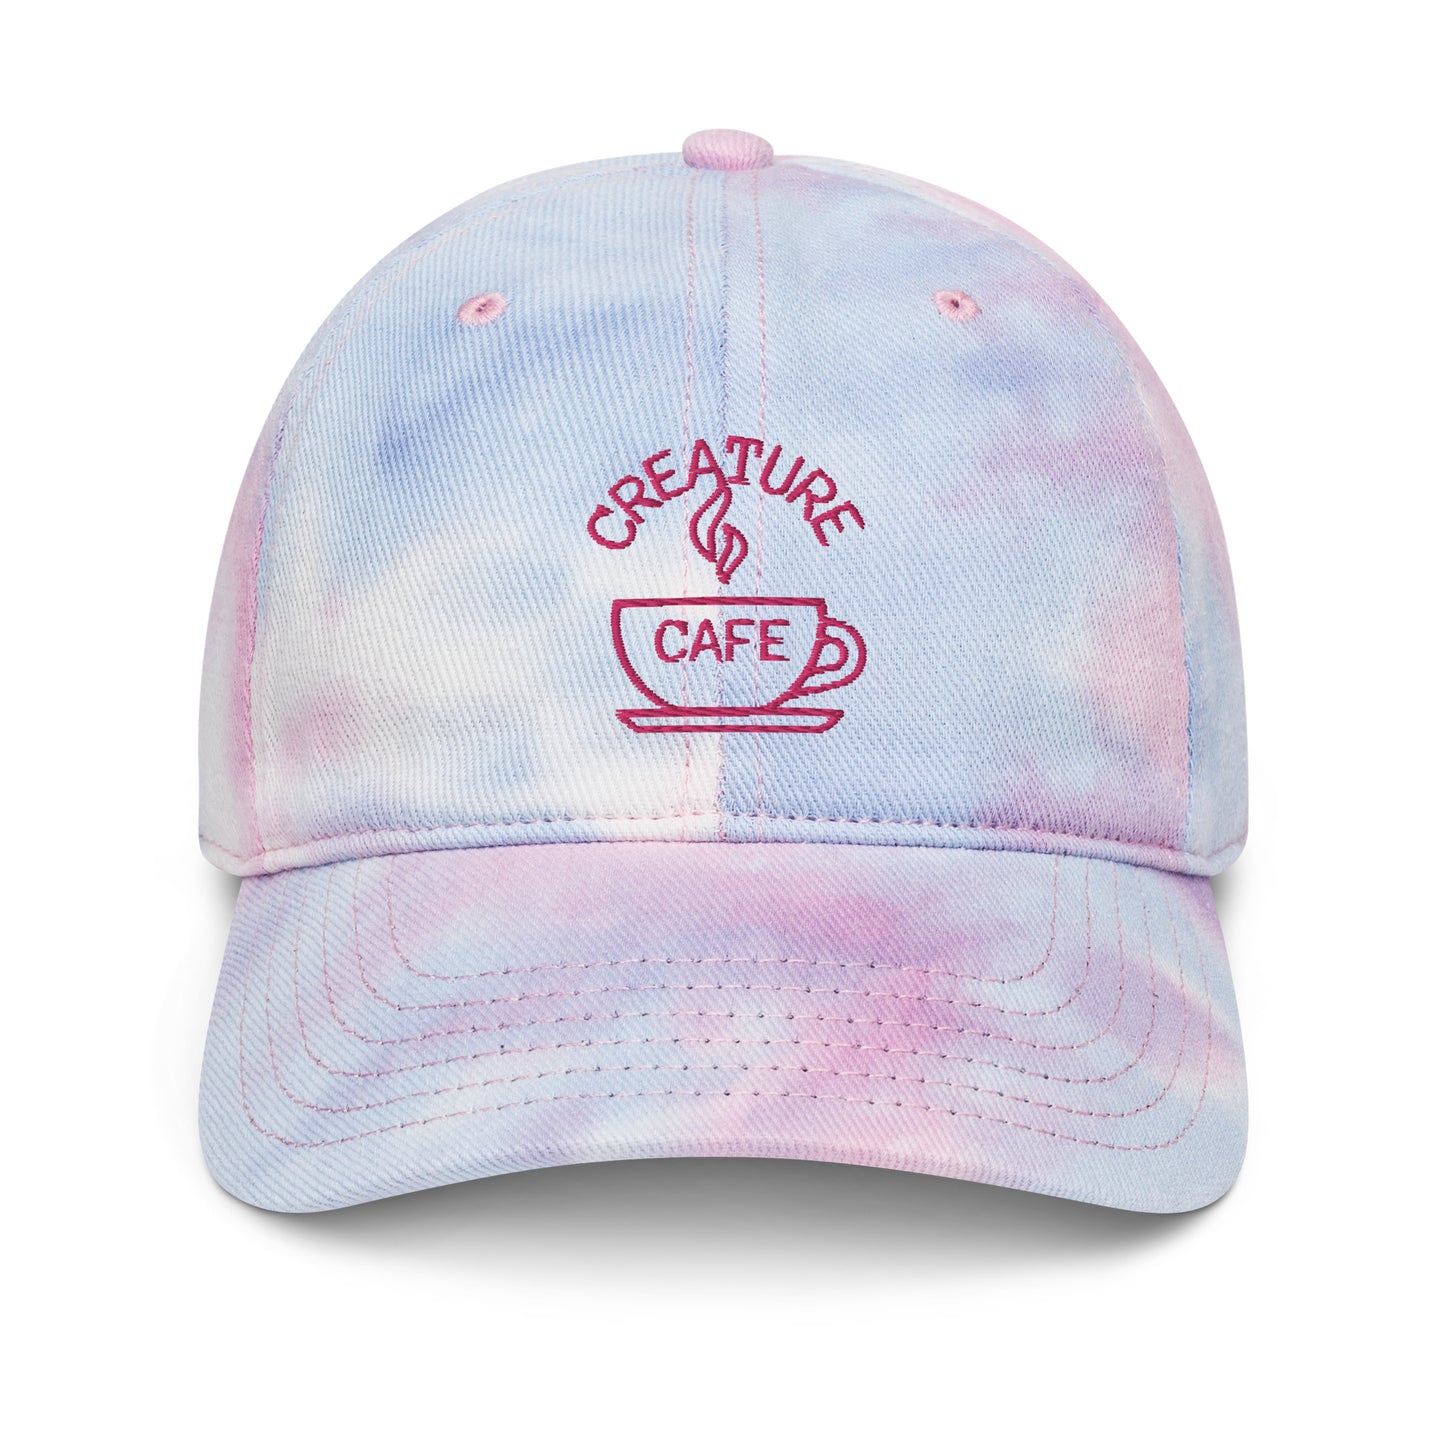 (Summer Collection) Creature Cafe Tie dye hat